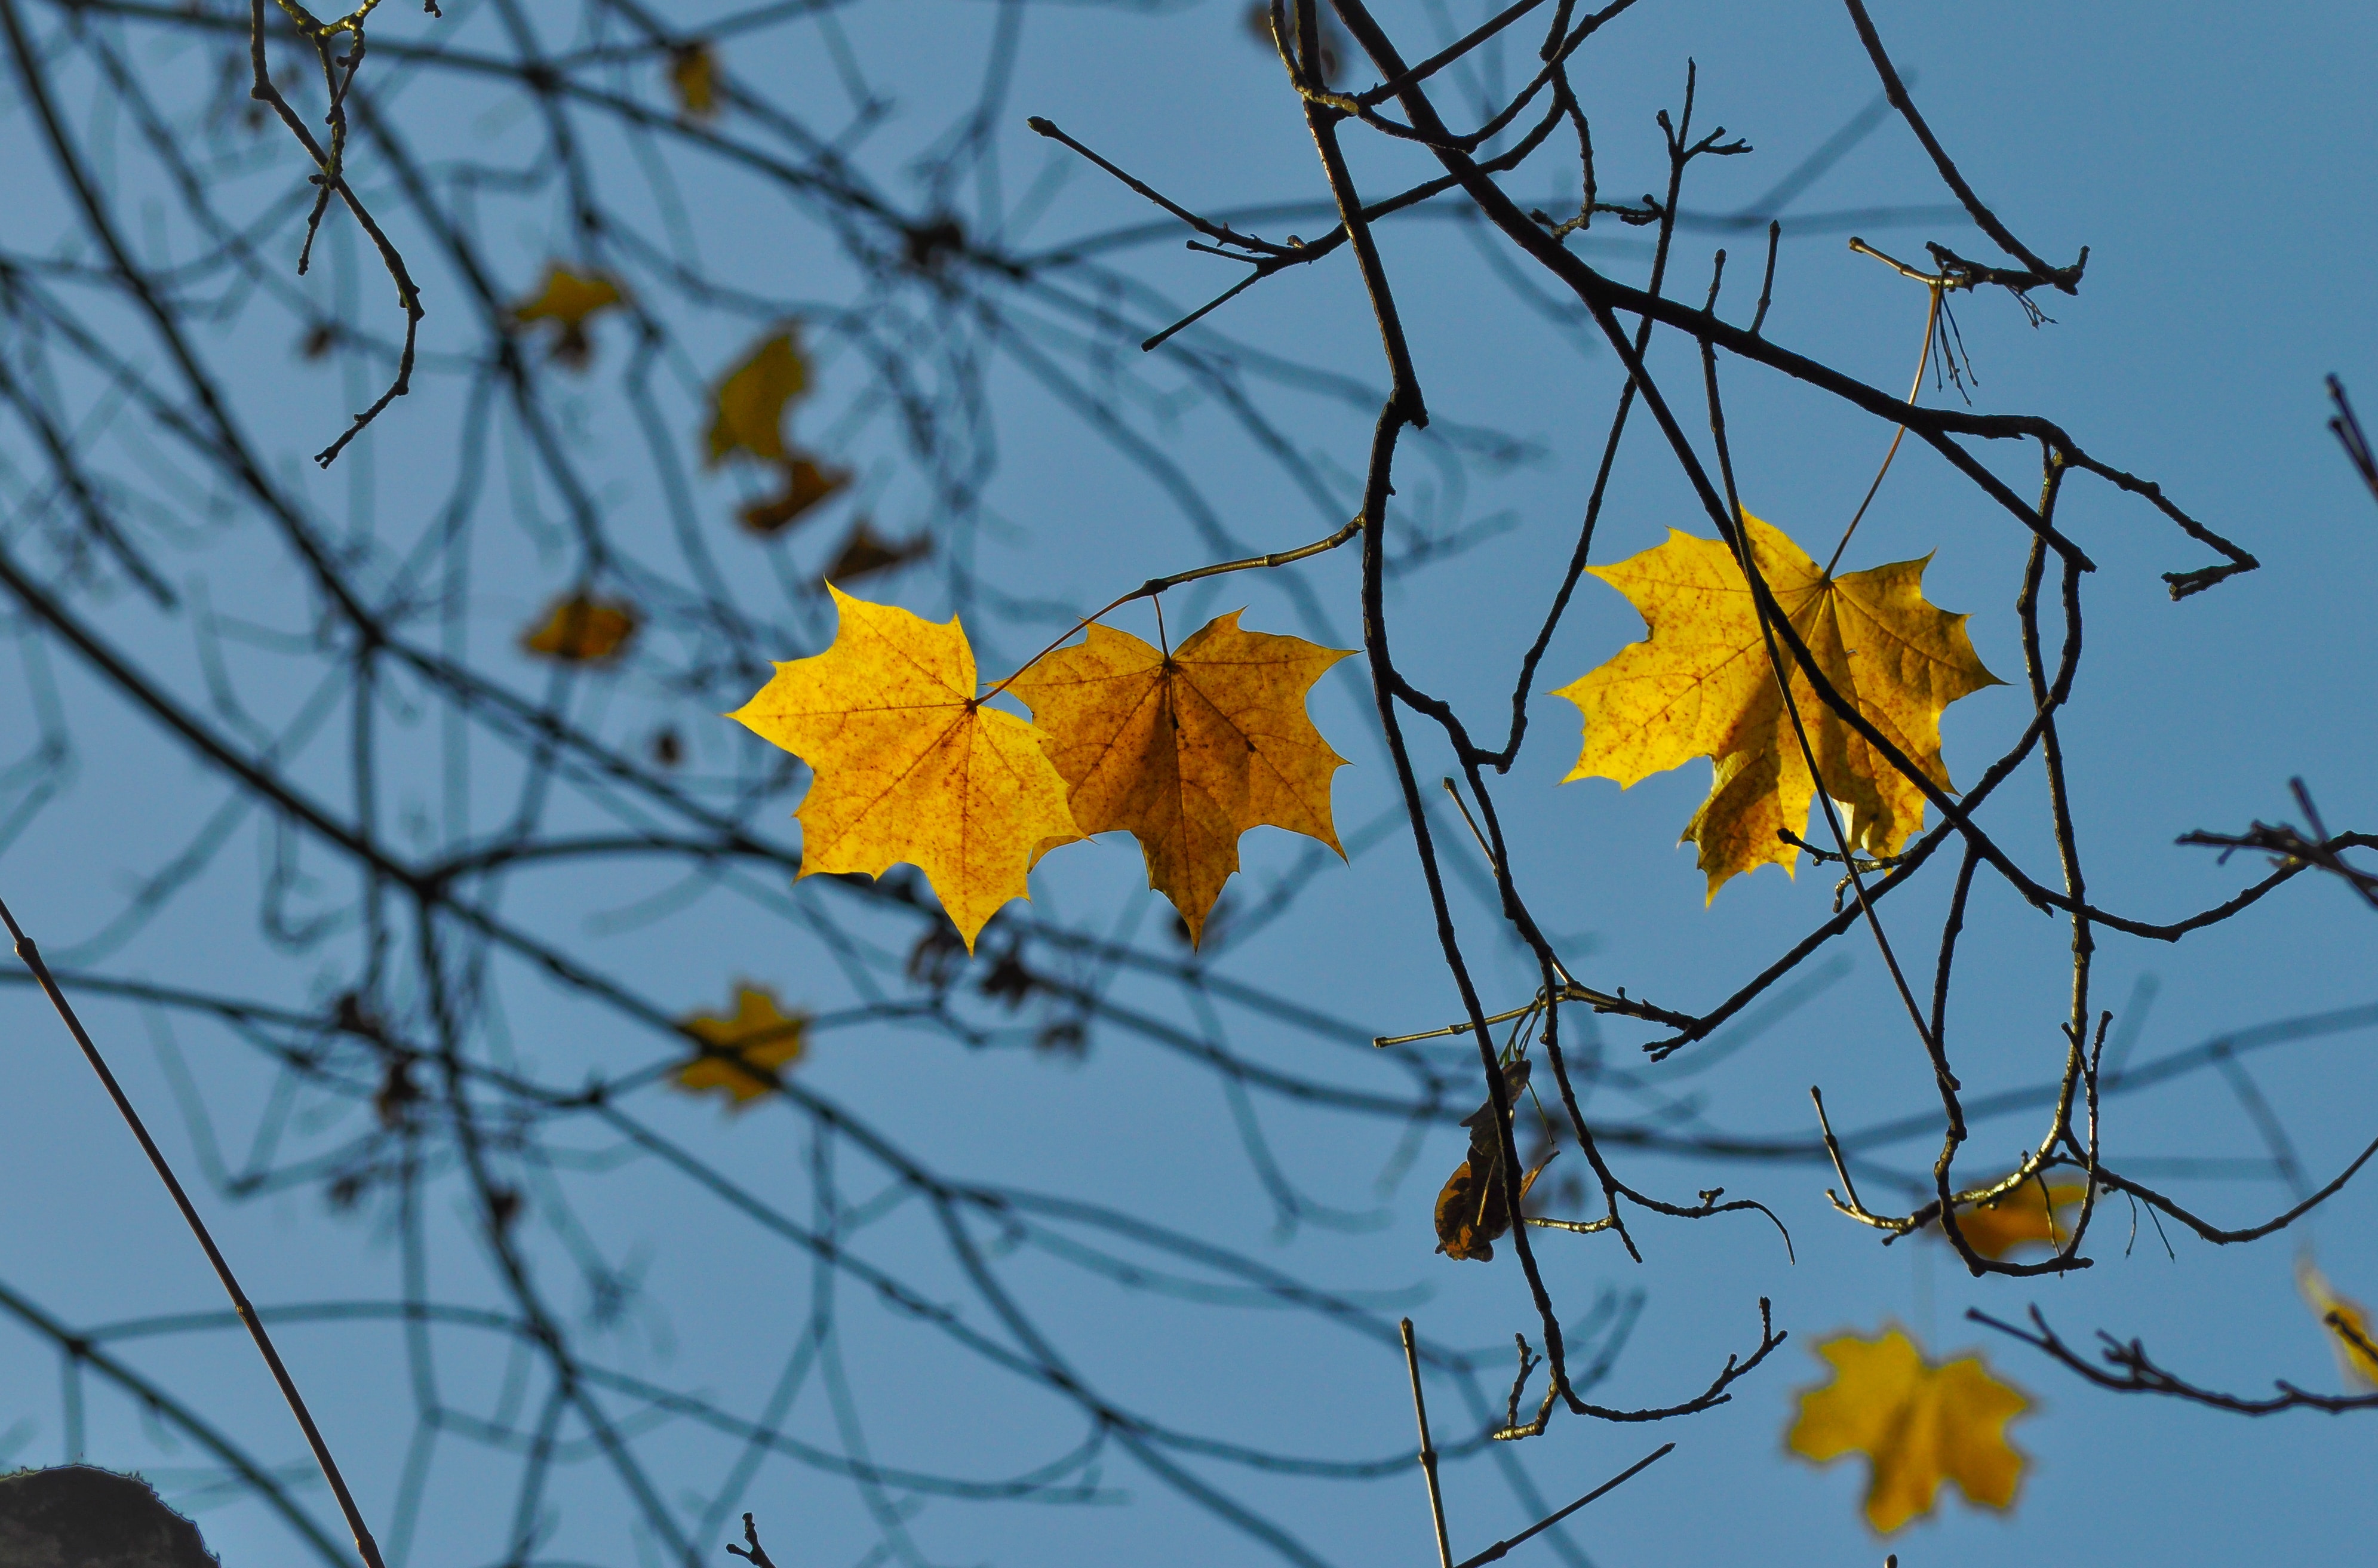 Leaves on a tree in fall